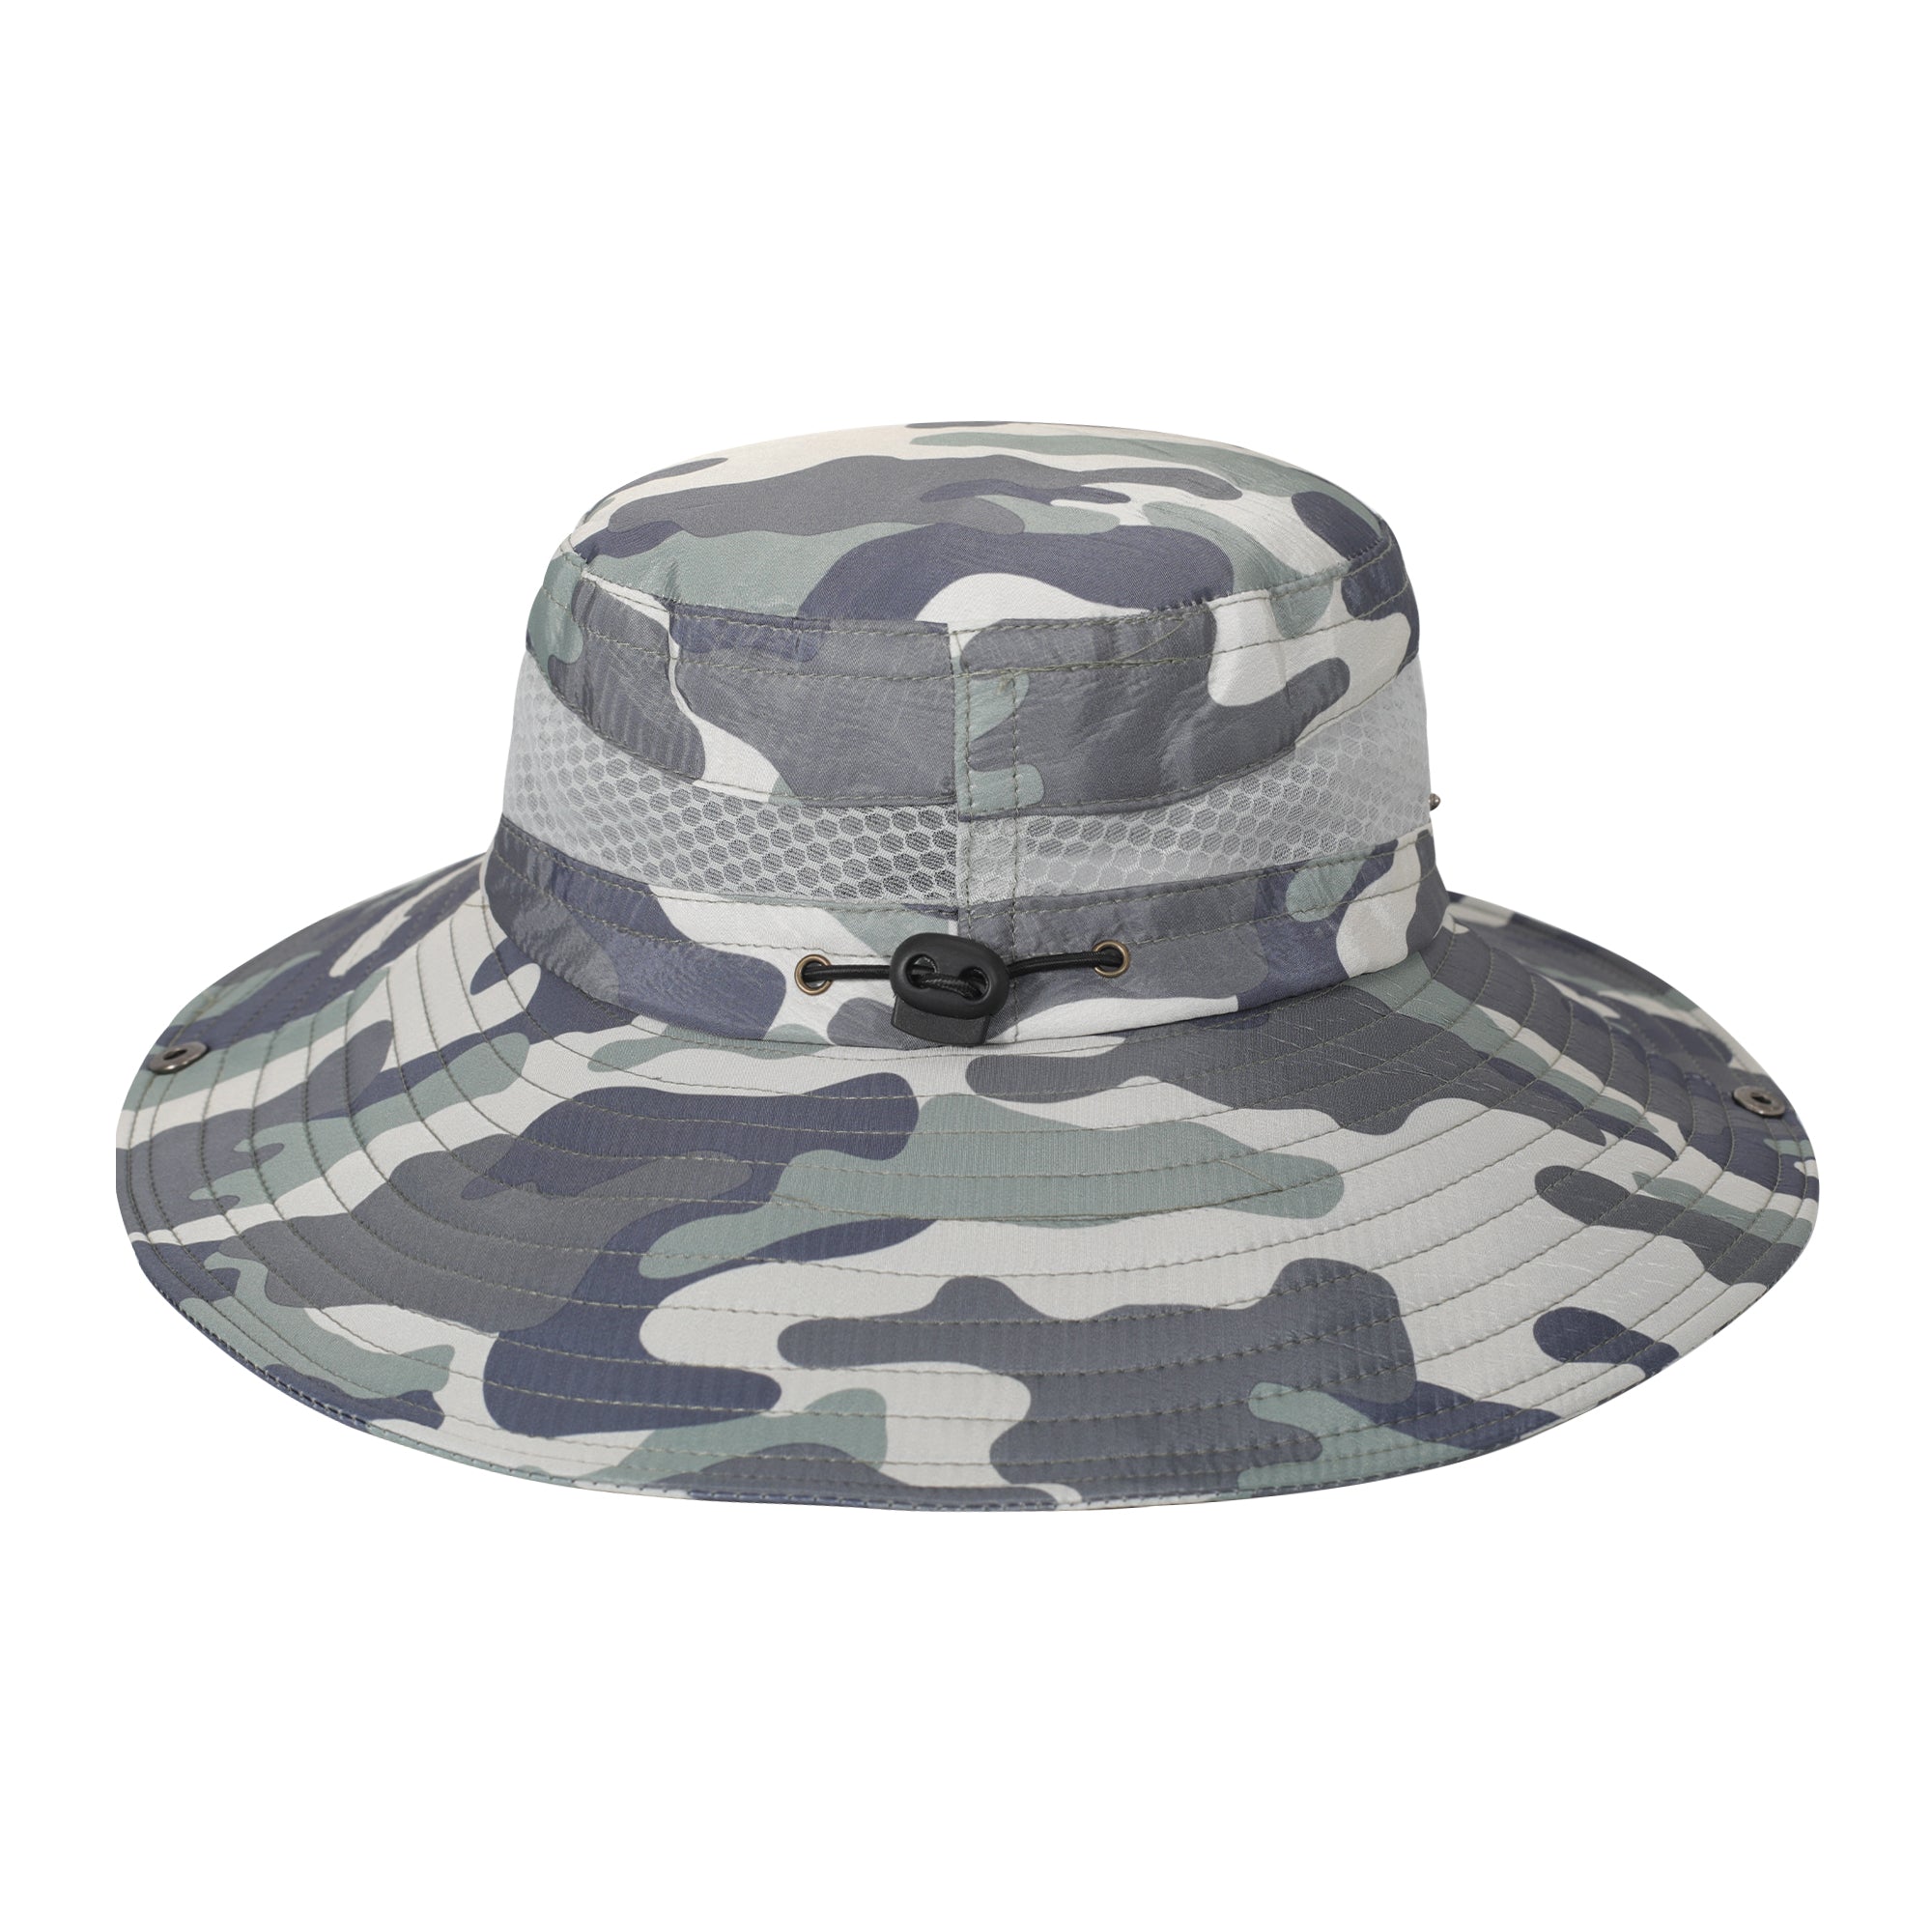 New Classic Camouflage Bucket Hat for Men Summer UV Protection Climbing  Fishing Hat 10cm Big Brim Mesh Breathable Sunscreen Cap